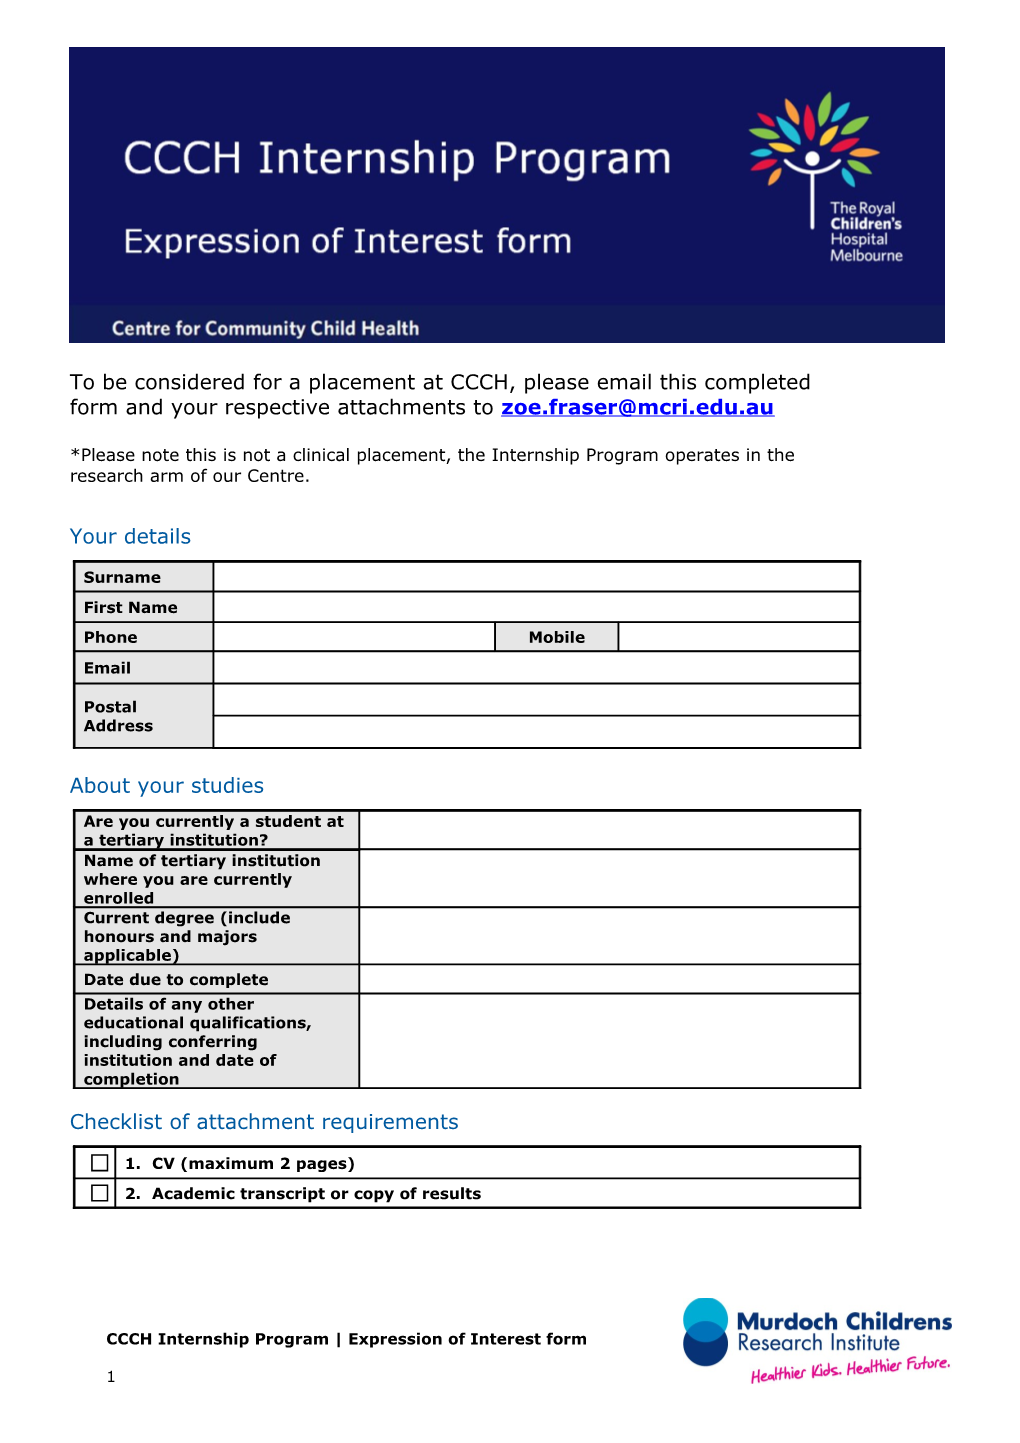 To Be Considered for a Placement at CCCH, Please Email This Completed Form and Your Respective